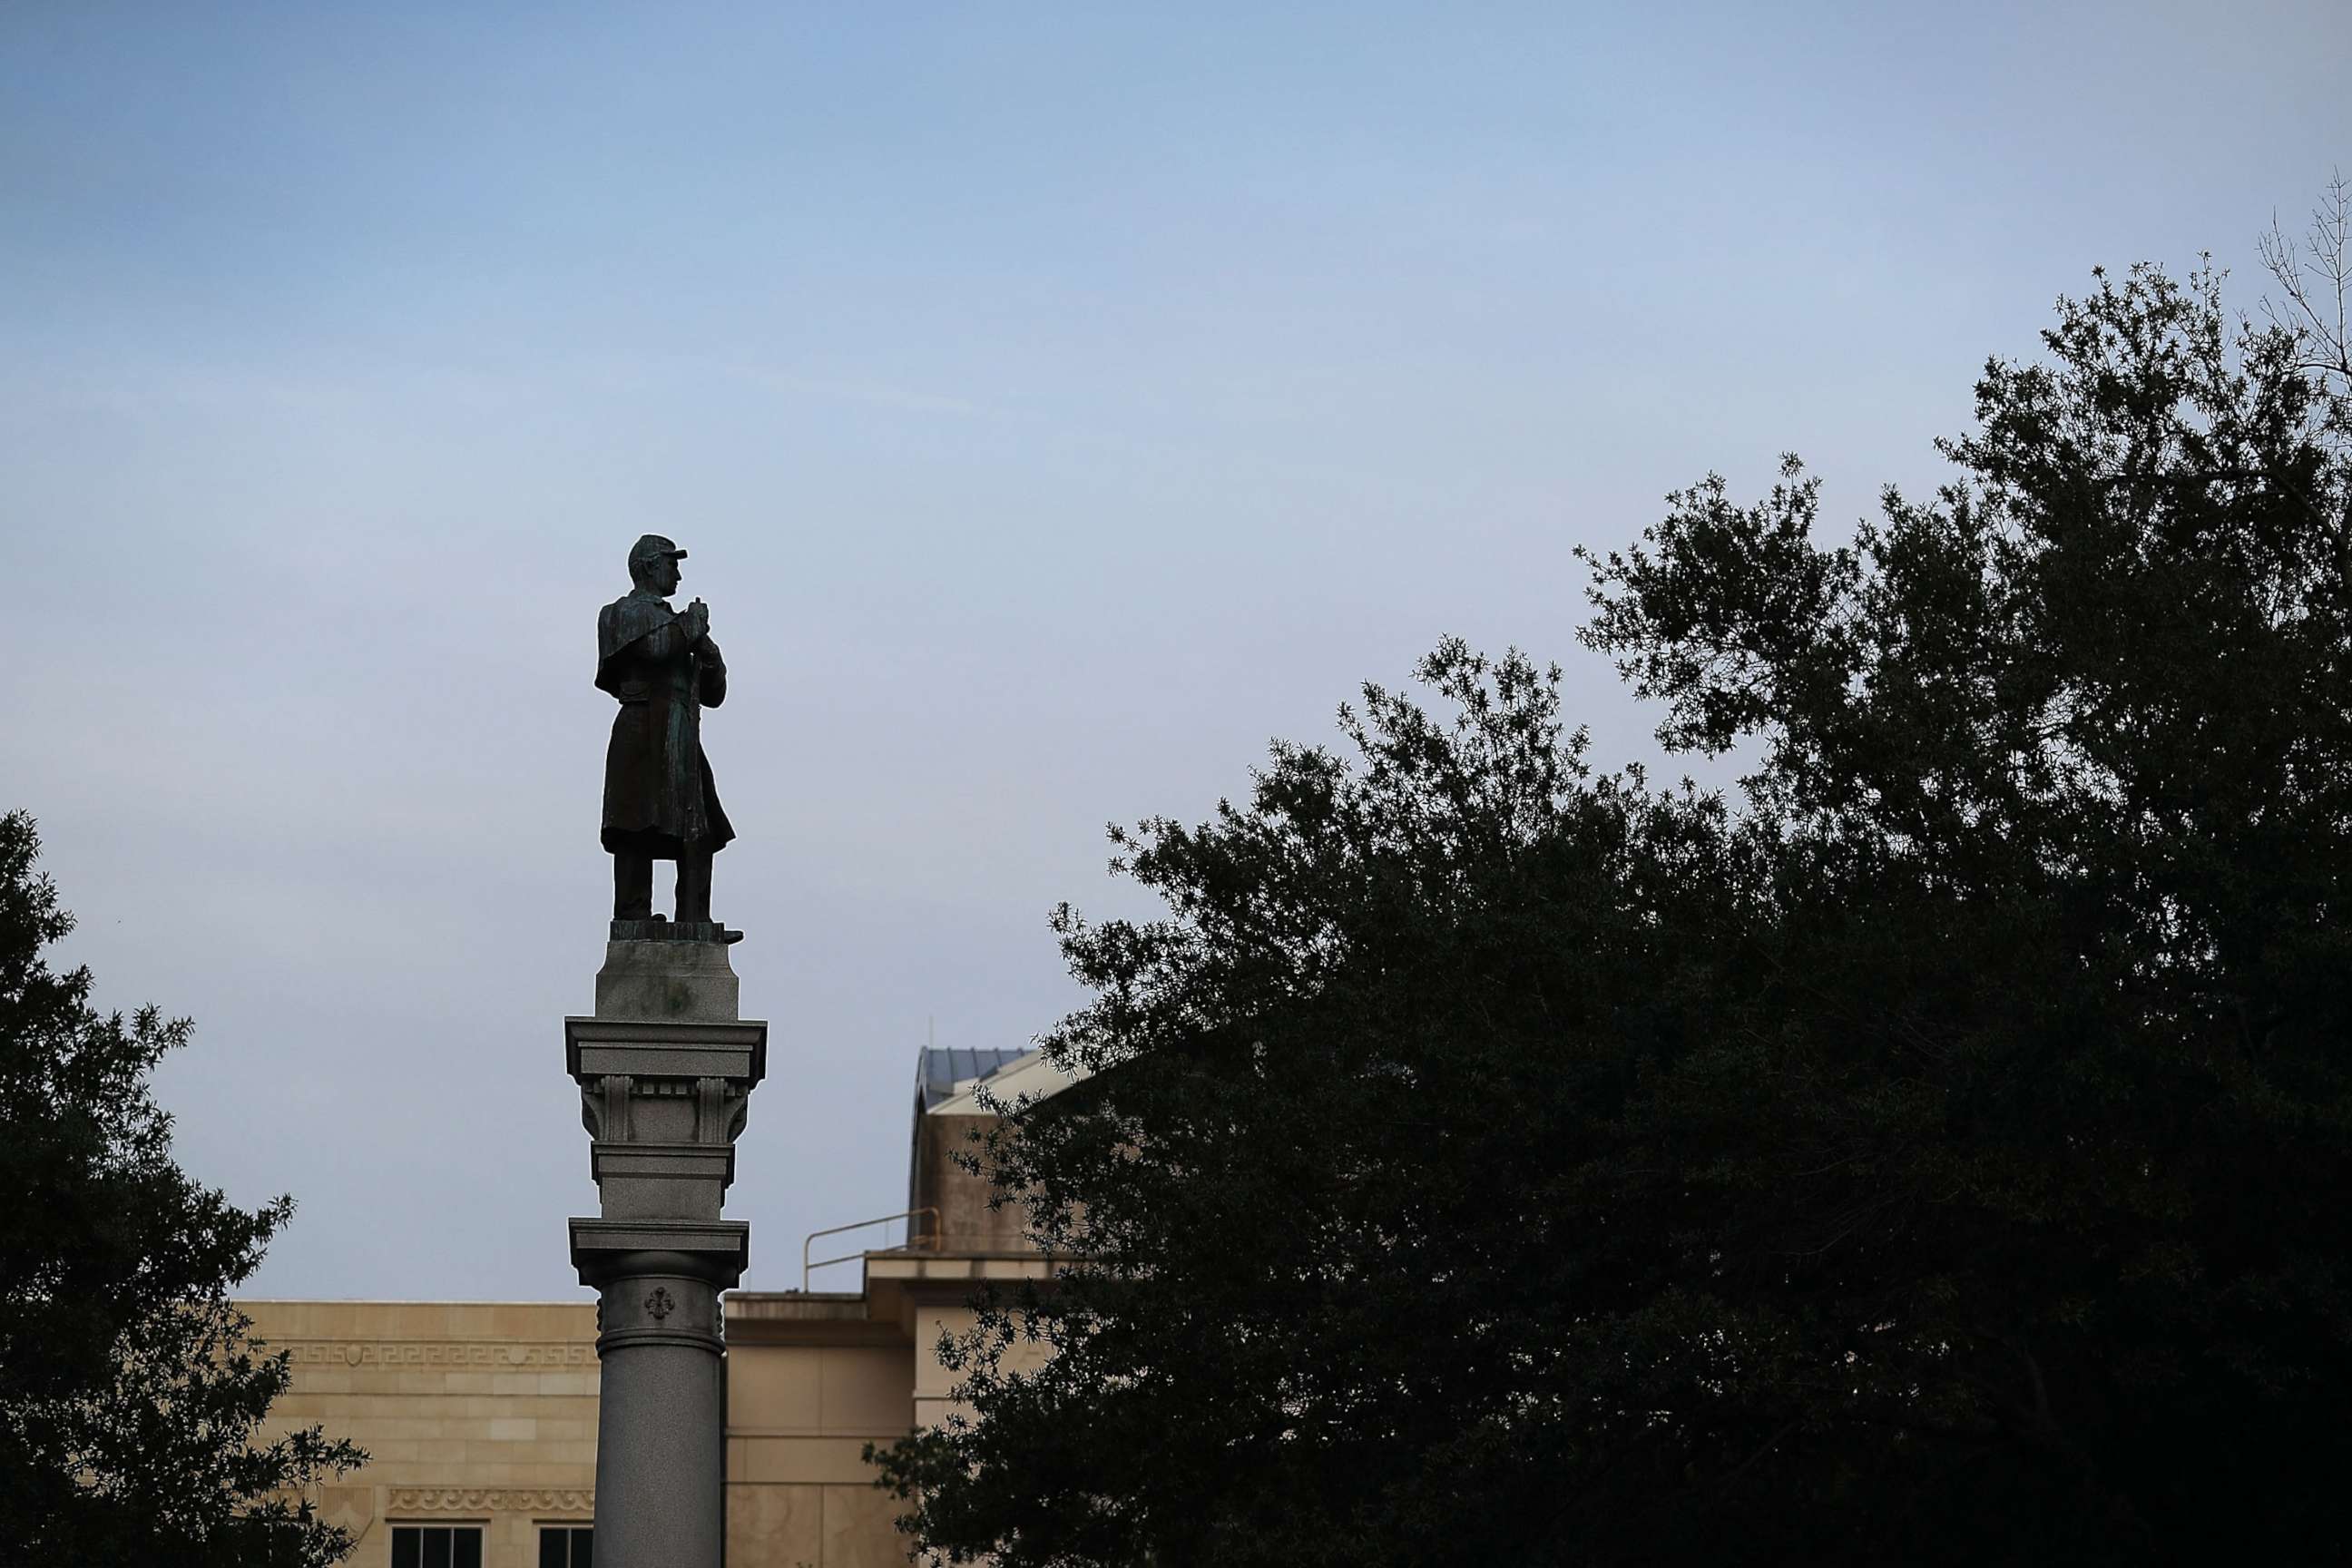 PHOTO: A monument featuring a statue of a Confederate soldier is seen in Hemming Park, Aug. 20, 2017, in Jacksonville, Florida.